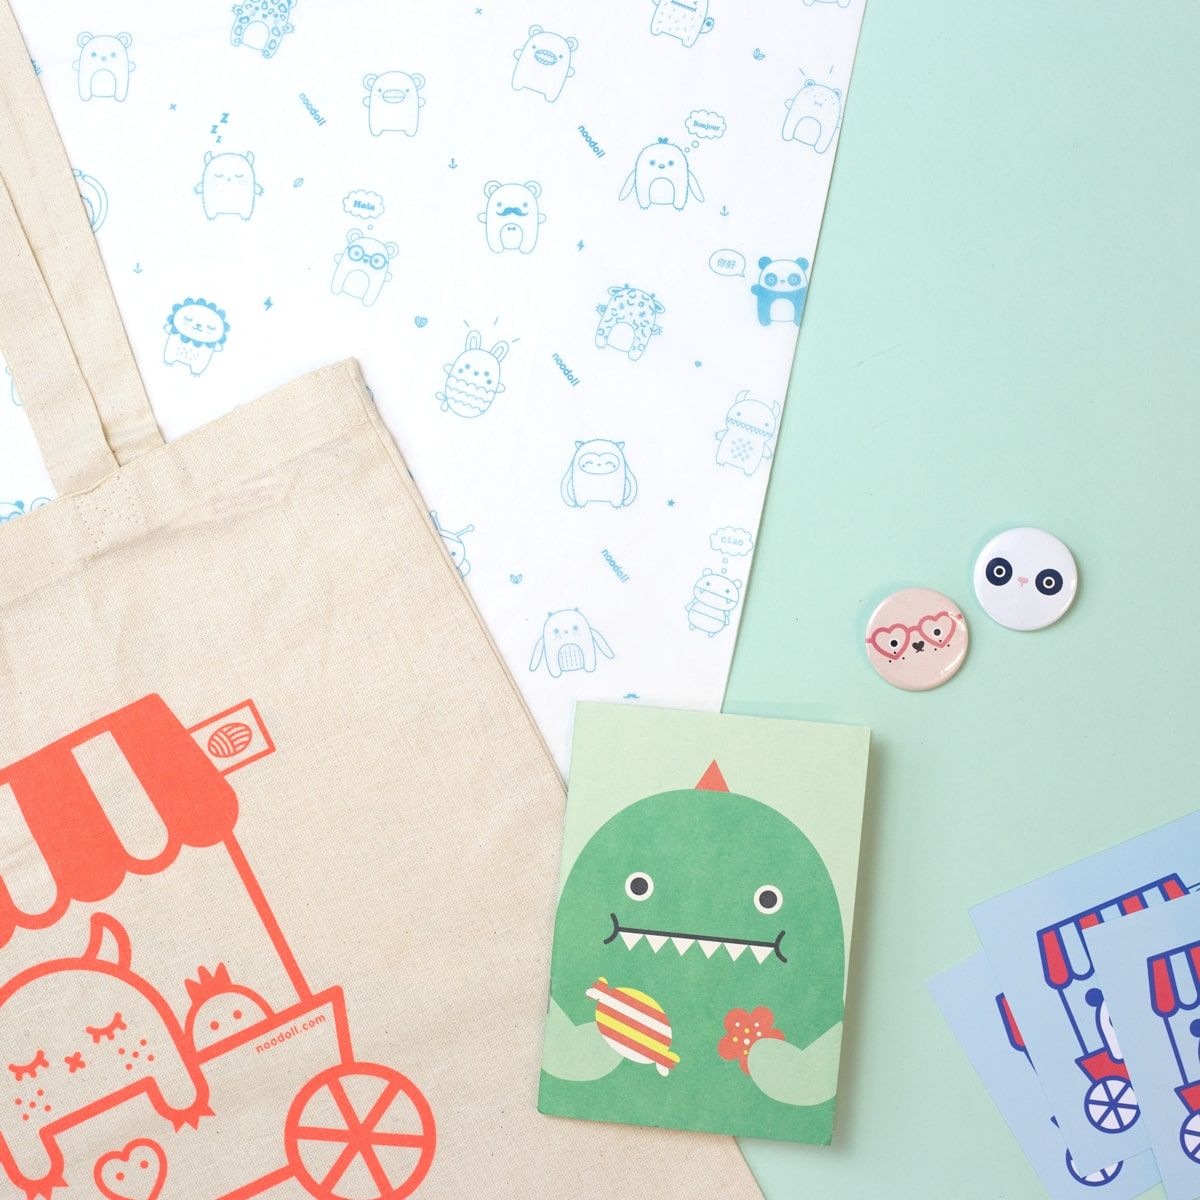 Noodoll: When Custom Sustainable Packaging Doubles as a Social Media Marketing Strategy